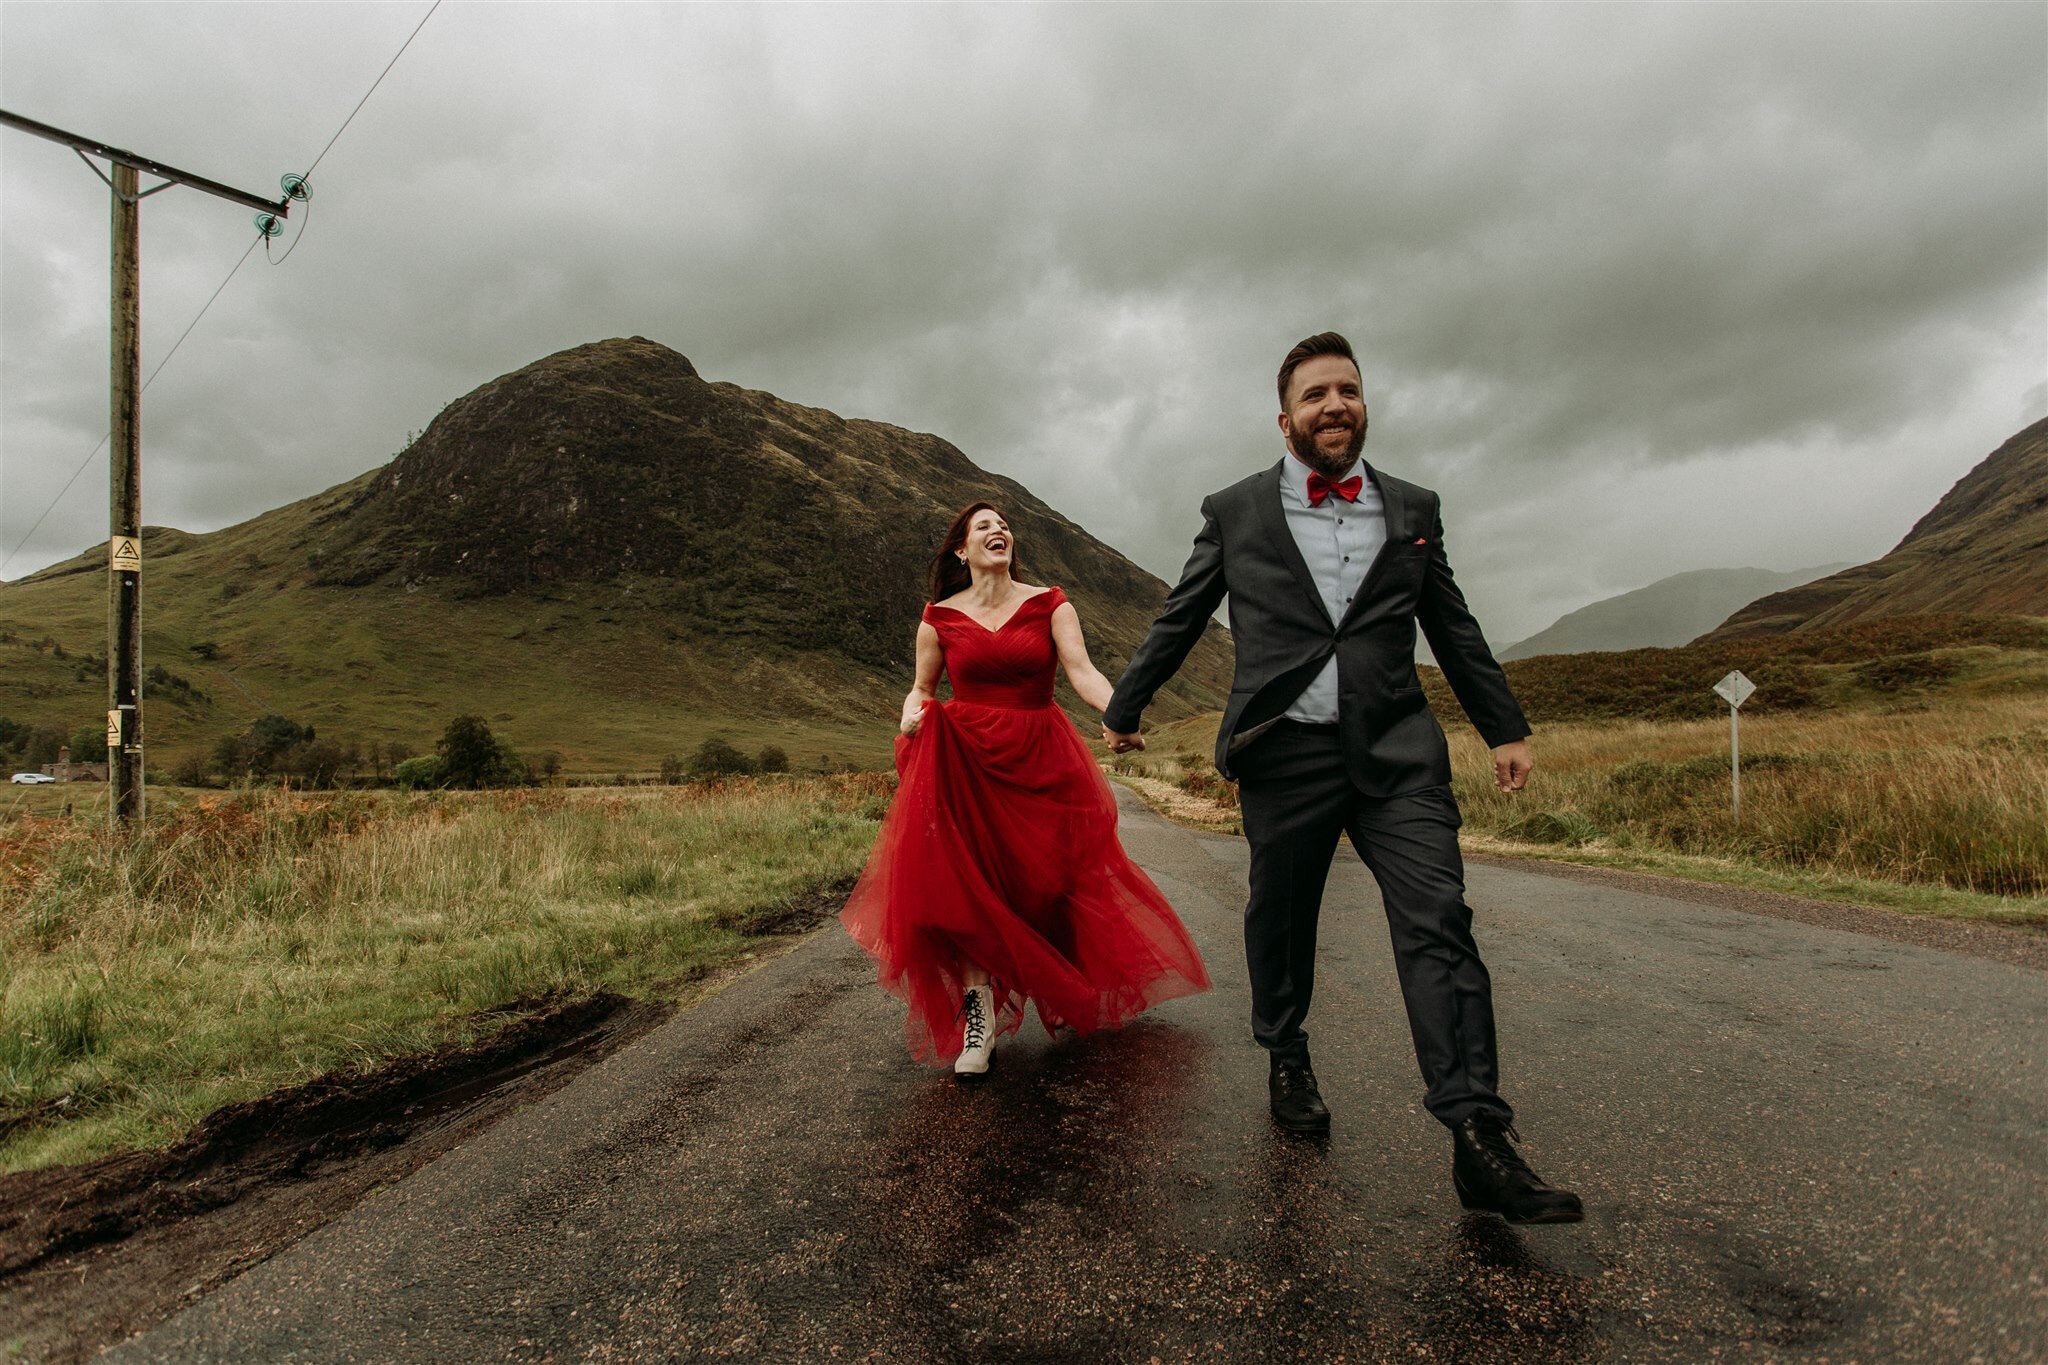 Glen Coe Scotland adventure elopement session. Bride in red dress and her groom walk hand in hand down a road in the windy Scottish Highlands | Adventure elopement photographer